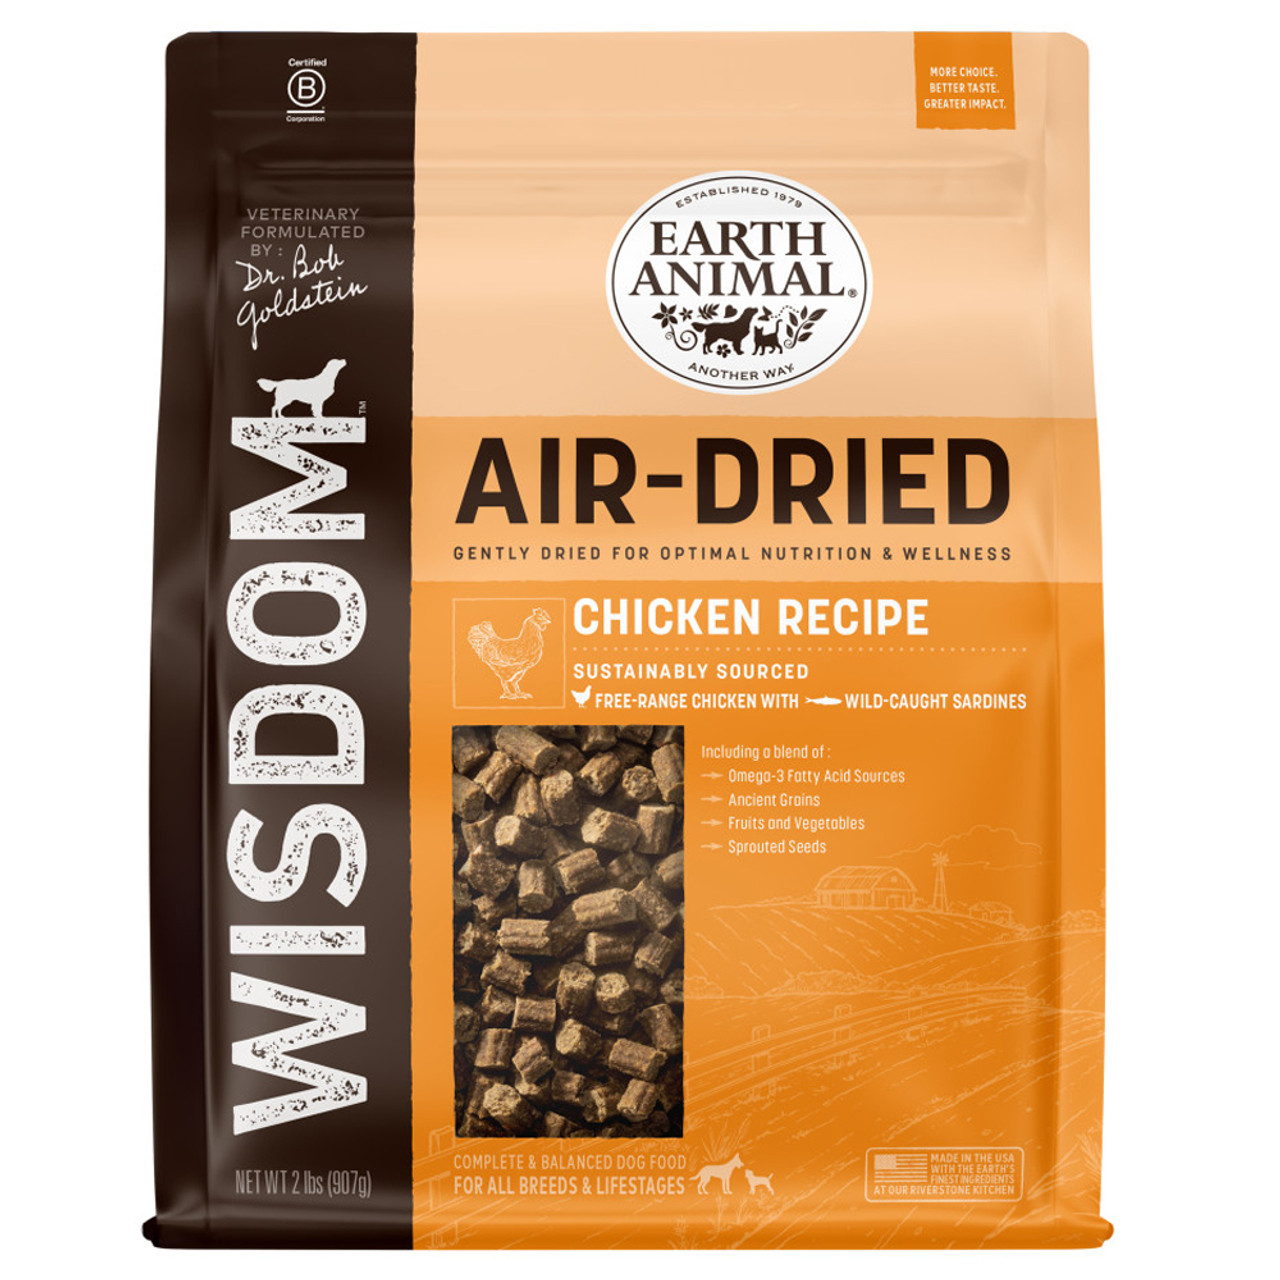 Real Meat Air Dried Dog Food w/Real Beef - 2lb Bag of USA-Crafted  Grain-Free Dog Food Sourced from Hormone-Free, Free-Range, Grass-Fed Beef 